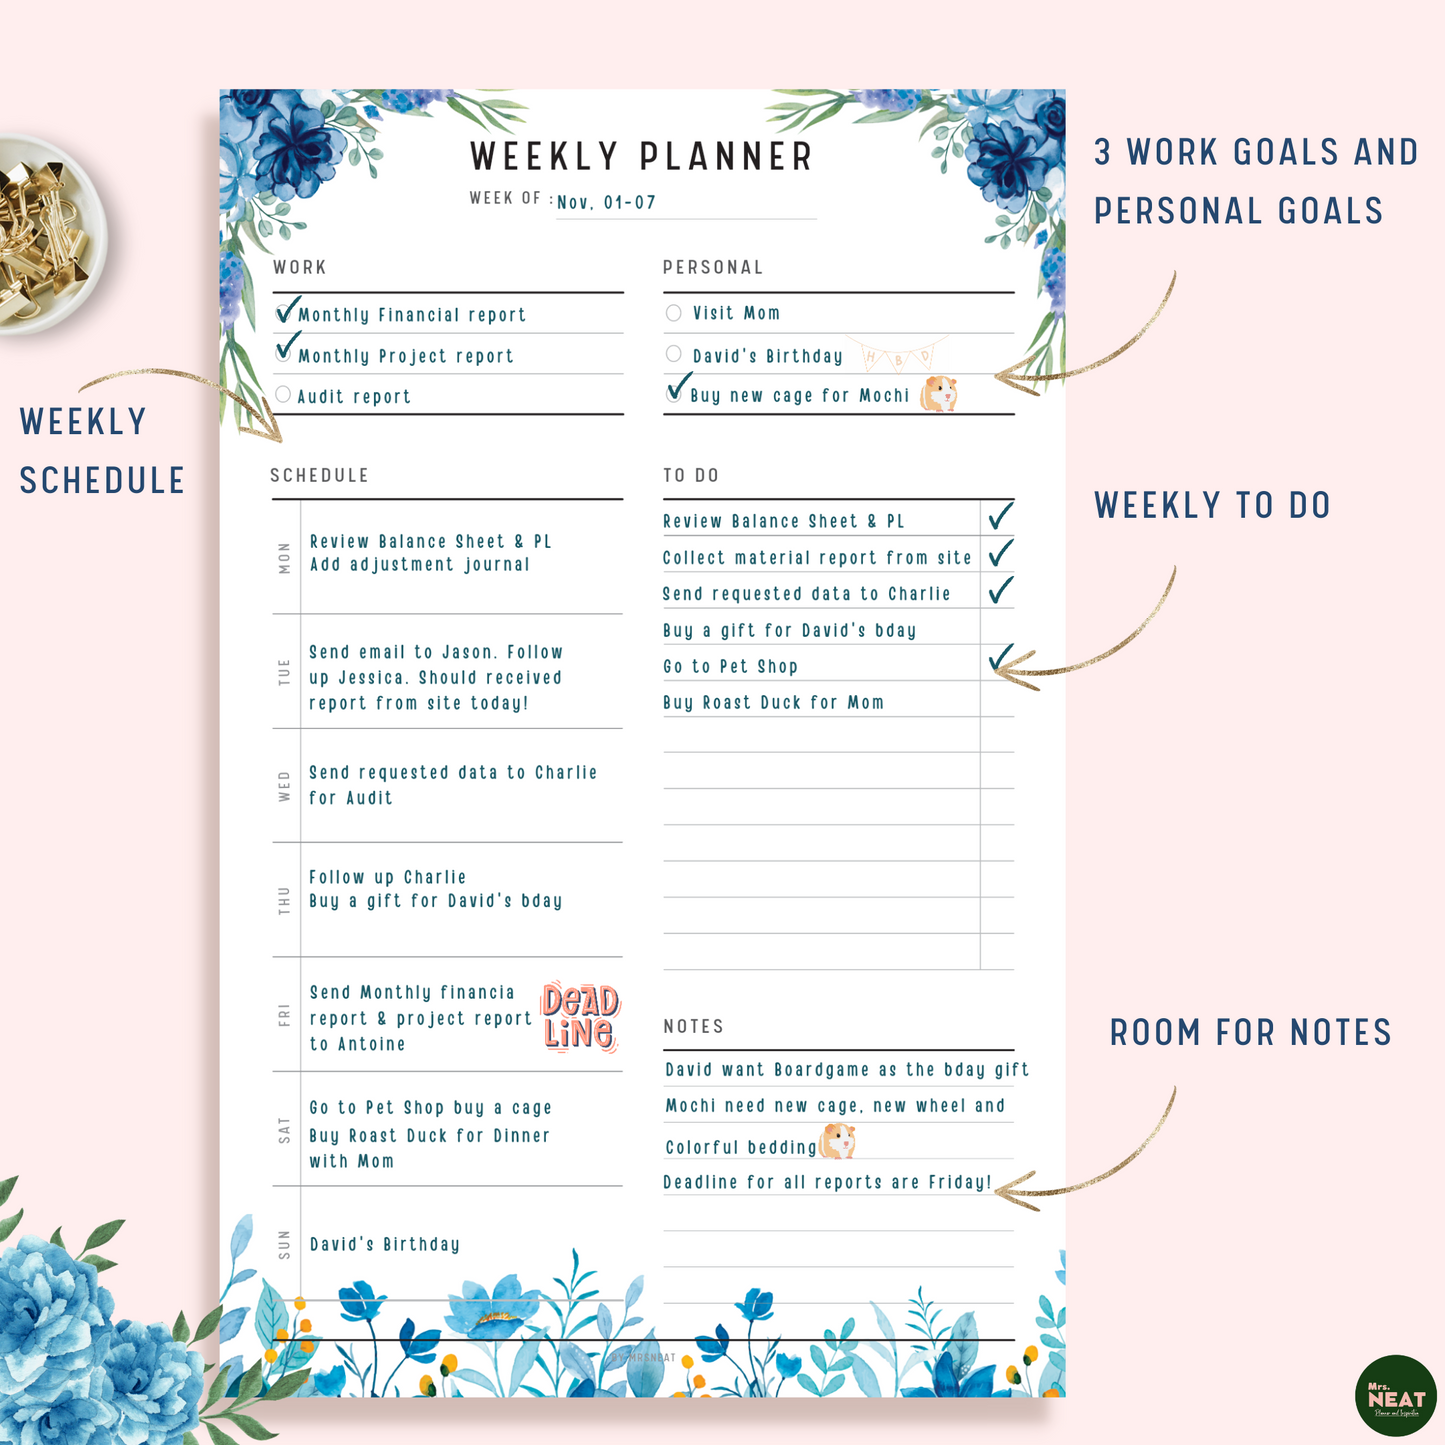 Floral Weekly Planner with room for Personal and Work Goals, Schedule, To Do List and Notes